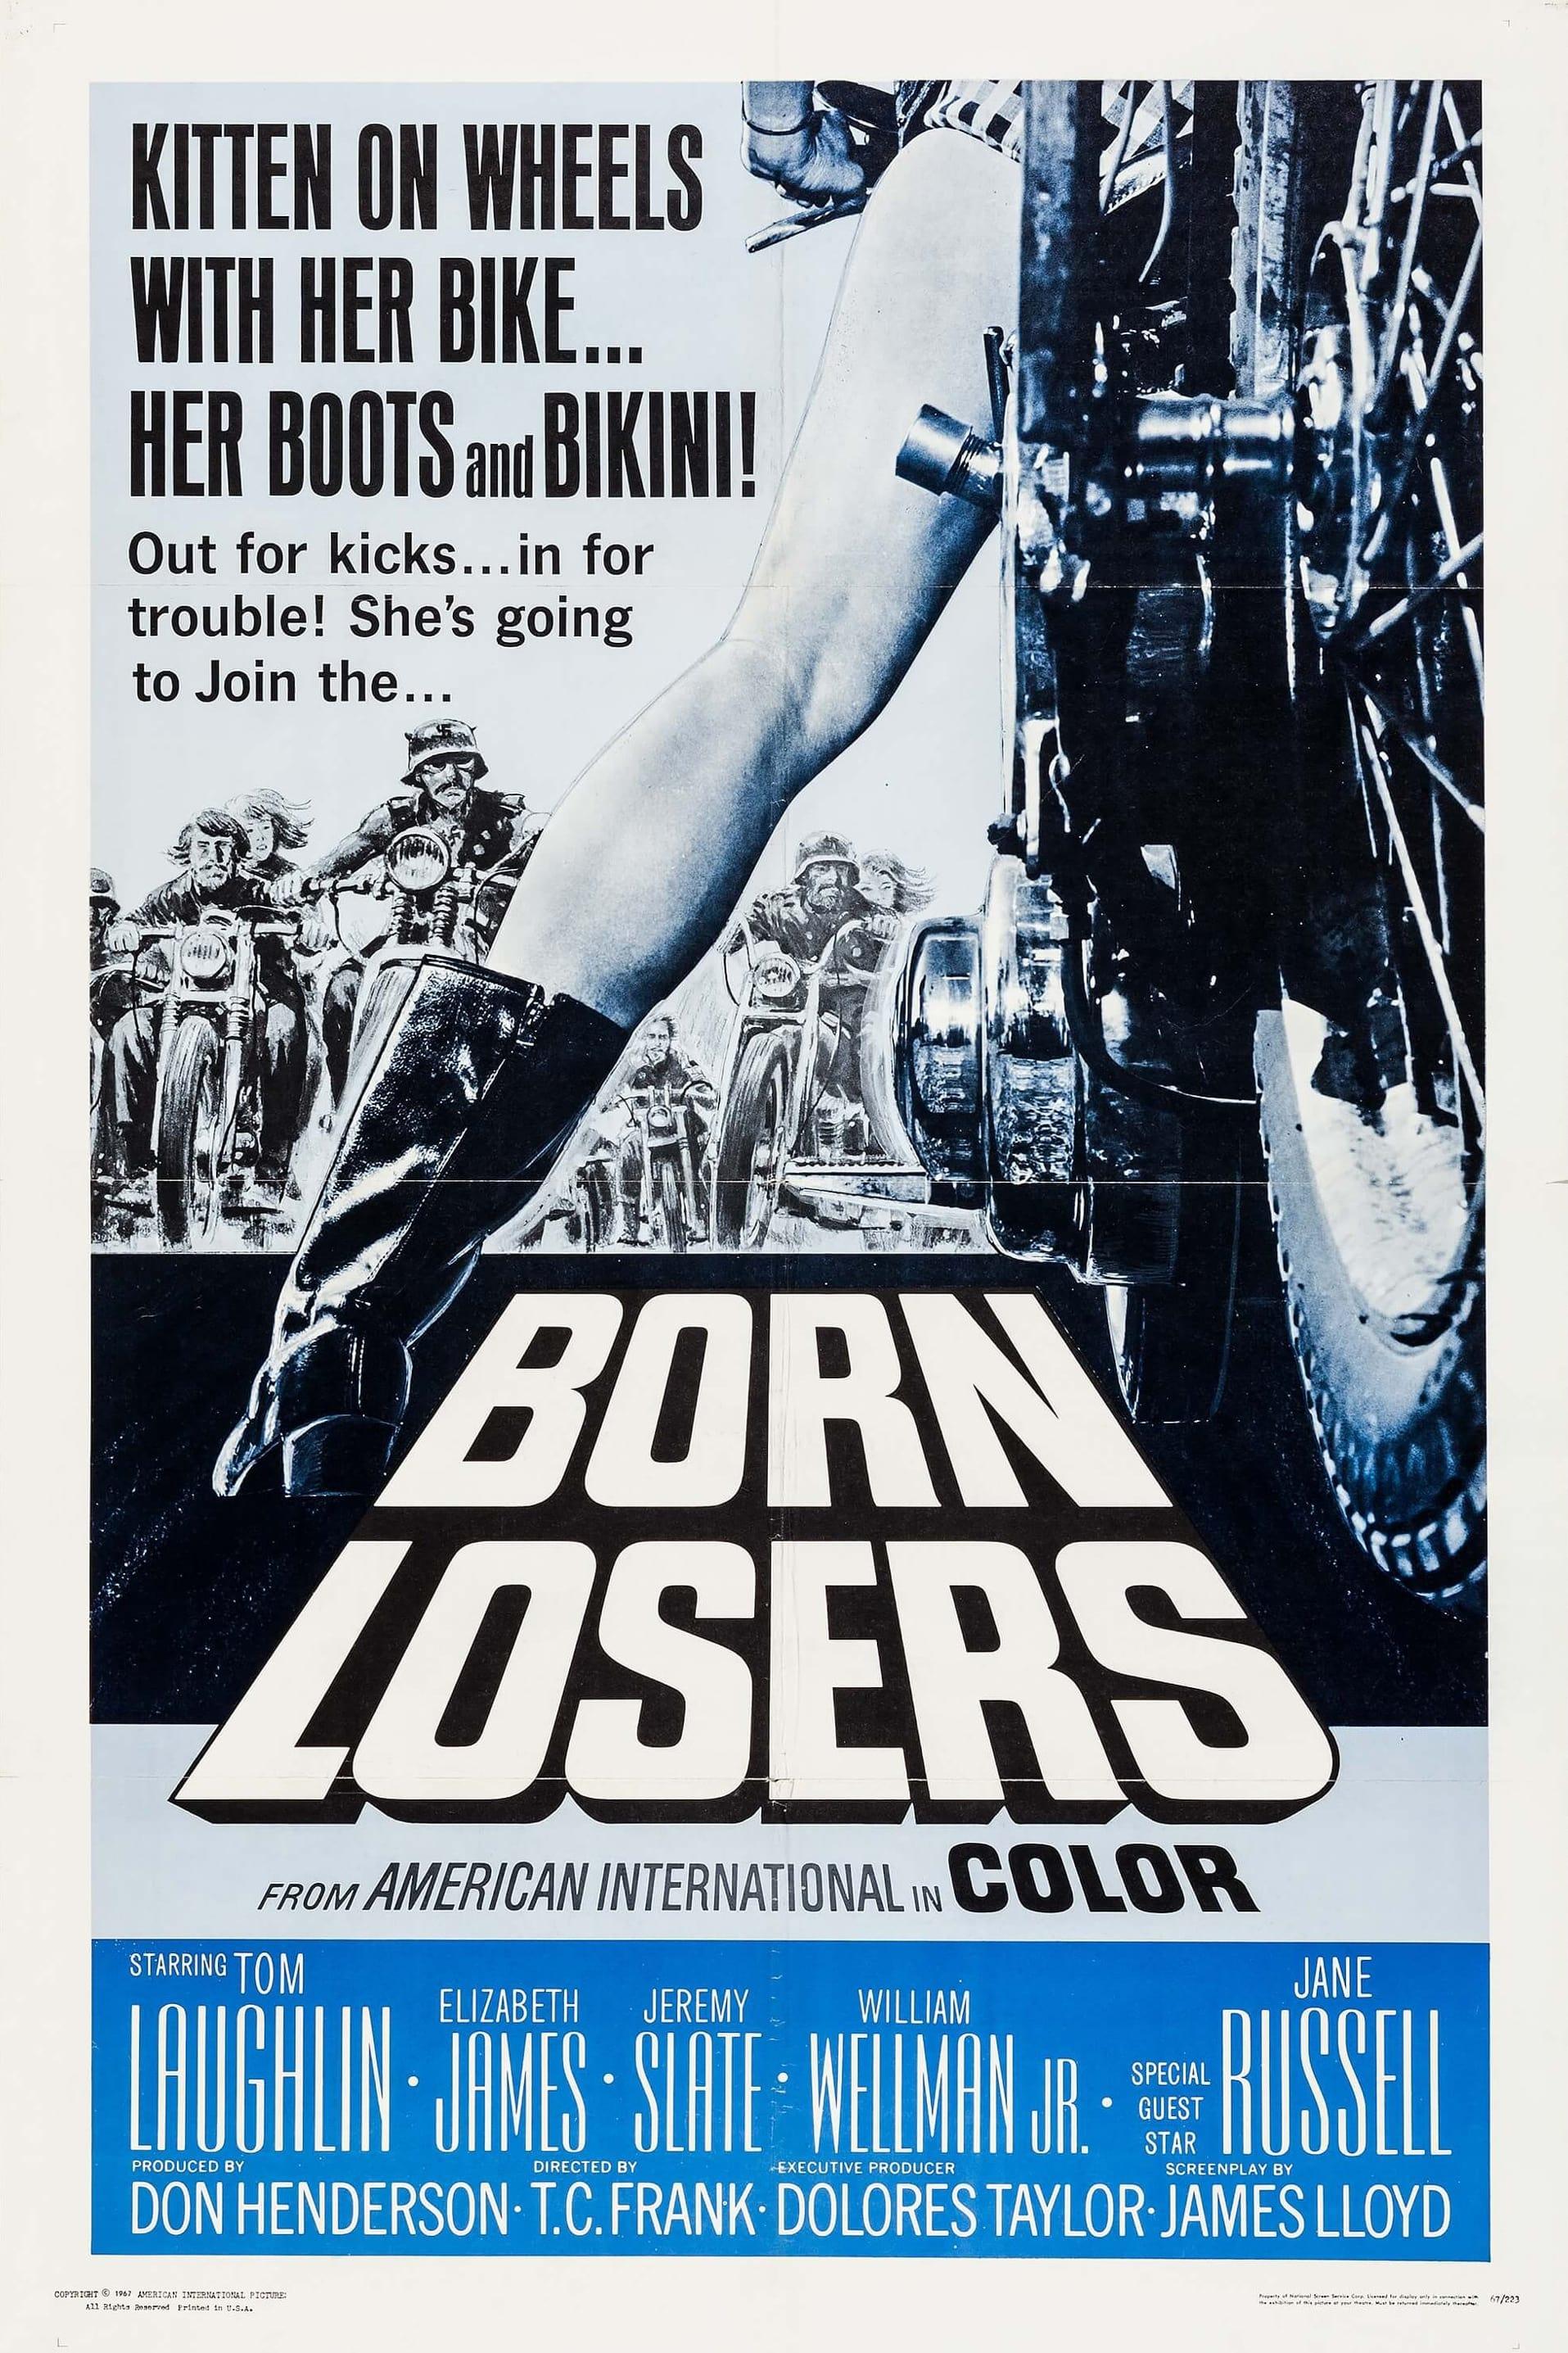 The Born Losers poster